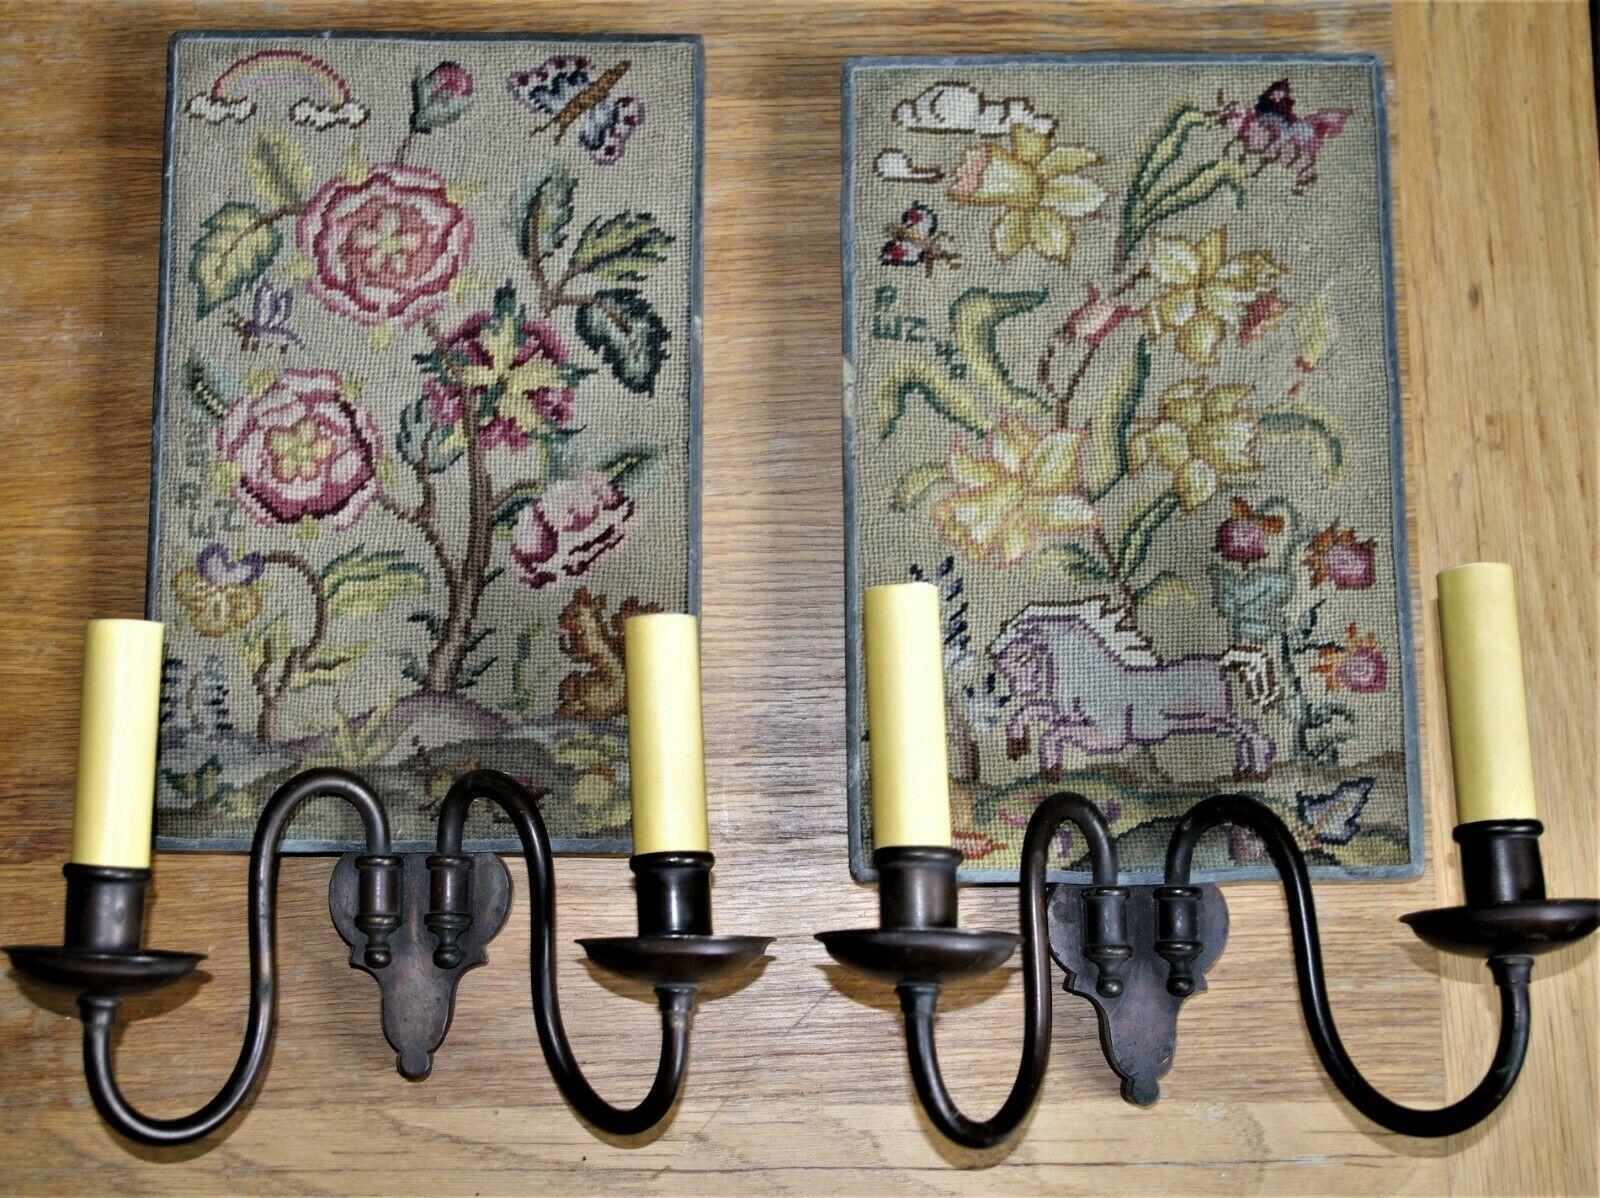 Pair E.F. Caldwell Custom Bronze Framed Hand Needlepoint Floral Wall Sconces. These are amazing. Signed by maker and one is marked 1939 and the other is marked 1940. This was a custom order. These sconces are very high quality. I purchased this pair